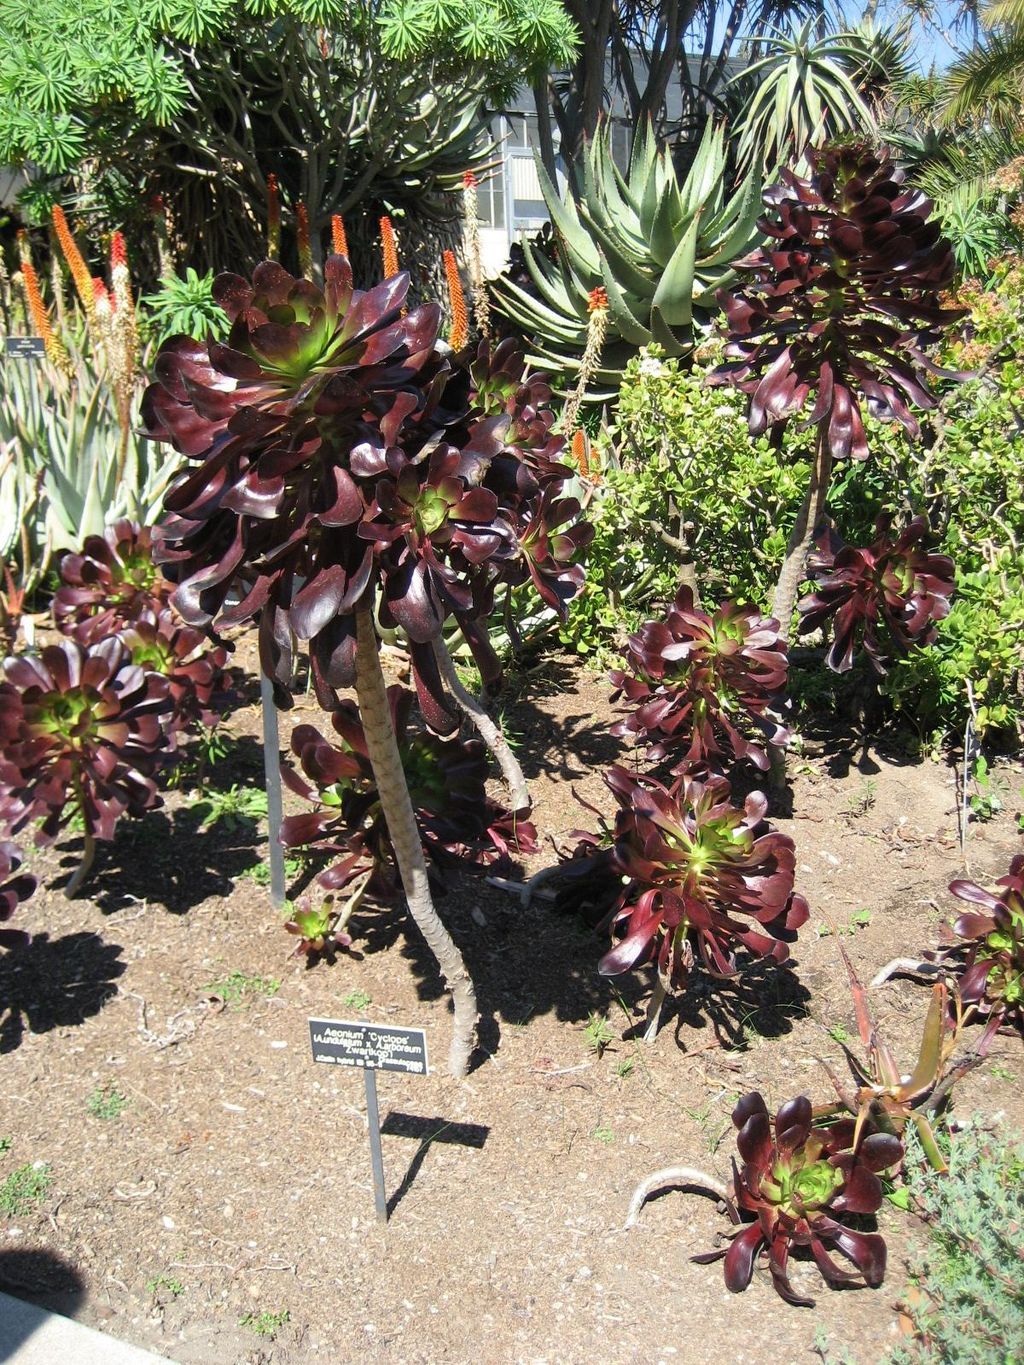 Aeonium cyclops is a showy succulent for your drought tolerant garden